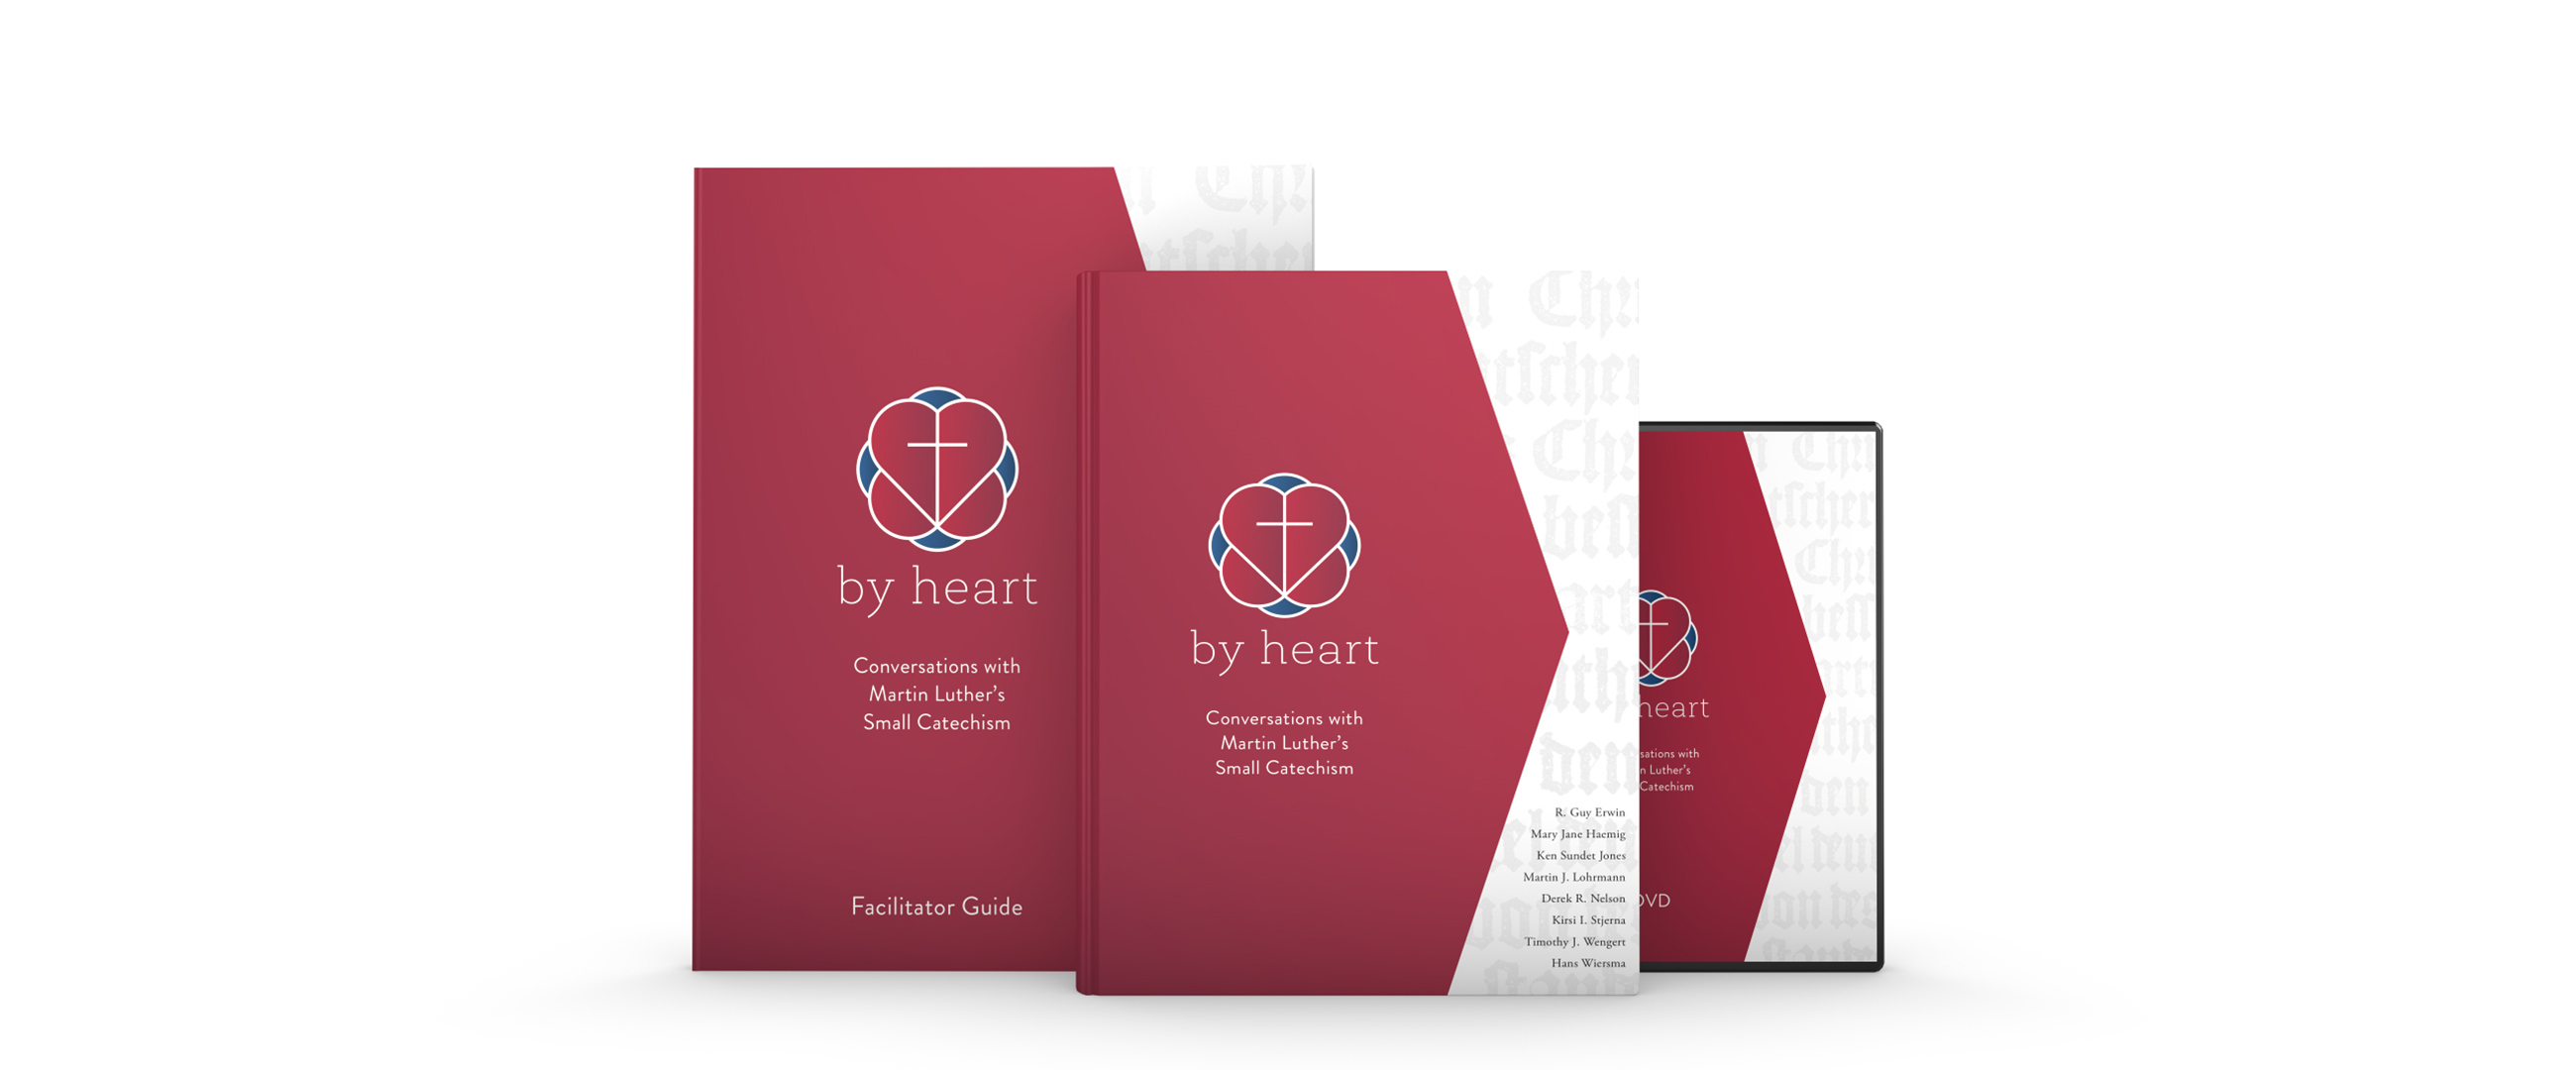 By Heart series covers